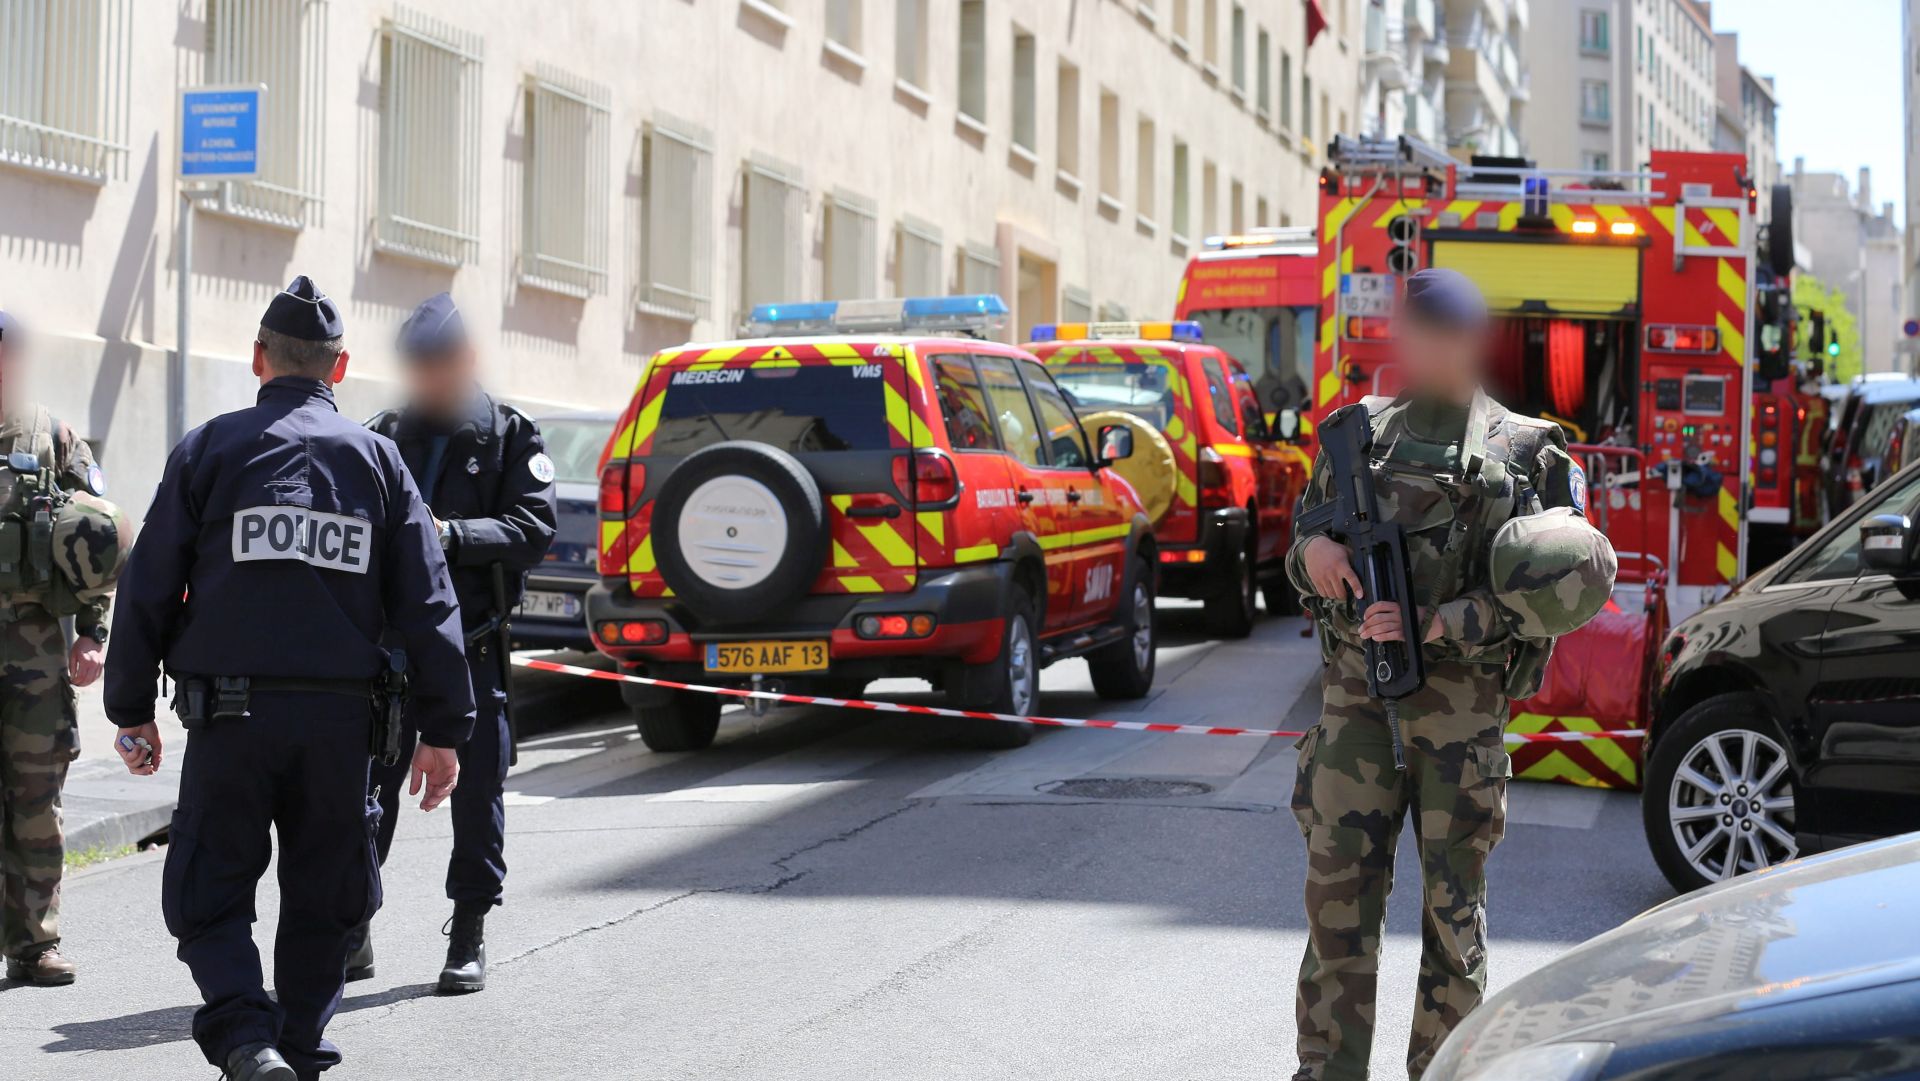 epa05913600 French soldiers, policemen and firefighter vehicles are seen at the site of a police search operation at the home of one of two men arrested, in the third district of Marseille, France, 18 April 2017. The two men are suspected of preparing an attack just days ahead of the first round of France's presidential vote. The suspects, aged 23 and 29, were taken into custody by French domestic intelligence service agents in the southern city of Marseille, a source close to the probe said.  EPA/DAVID ROSSI OFFICIALS FACES PIXELATED BY SOURCE
FRANCE OUT / NO MAG SALES